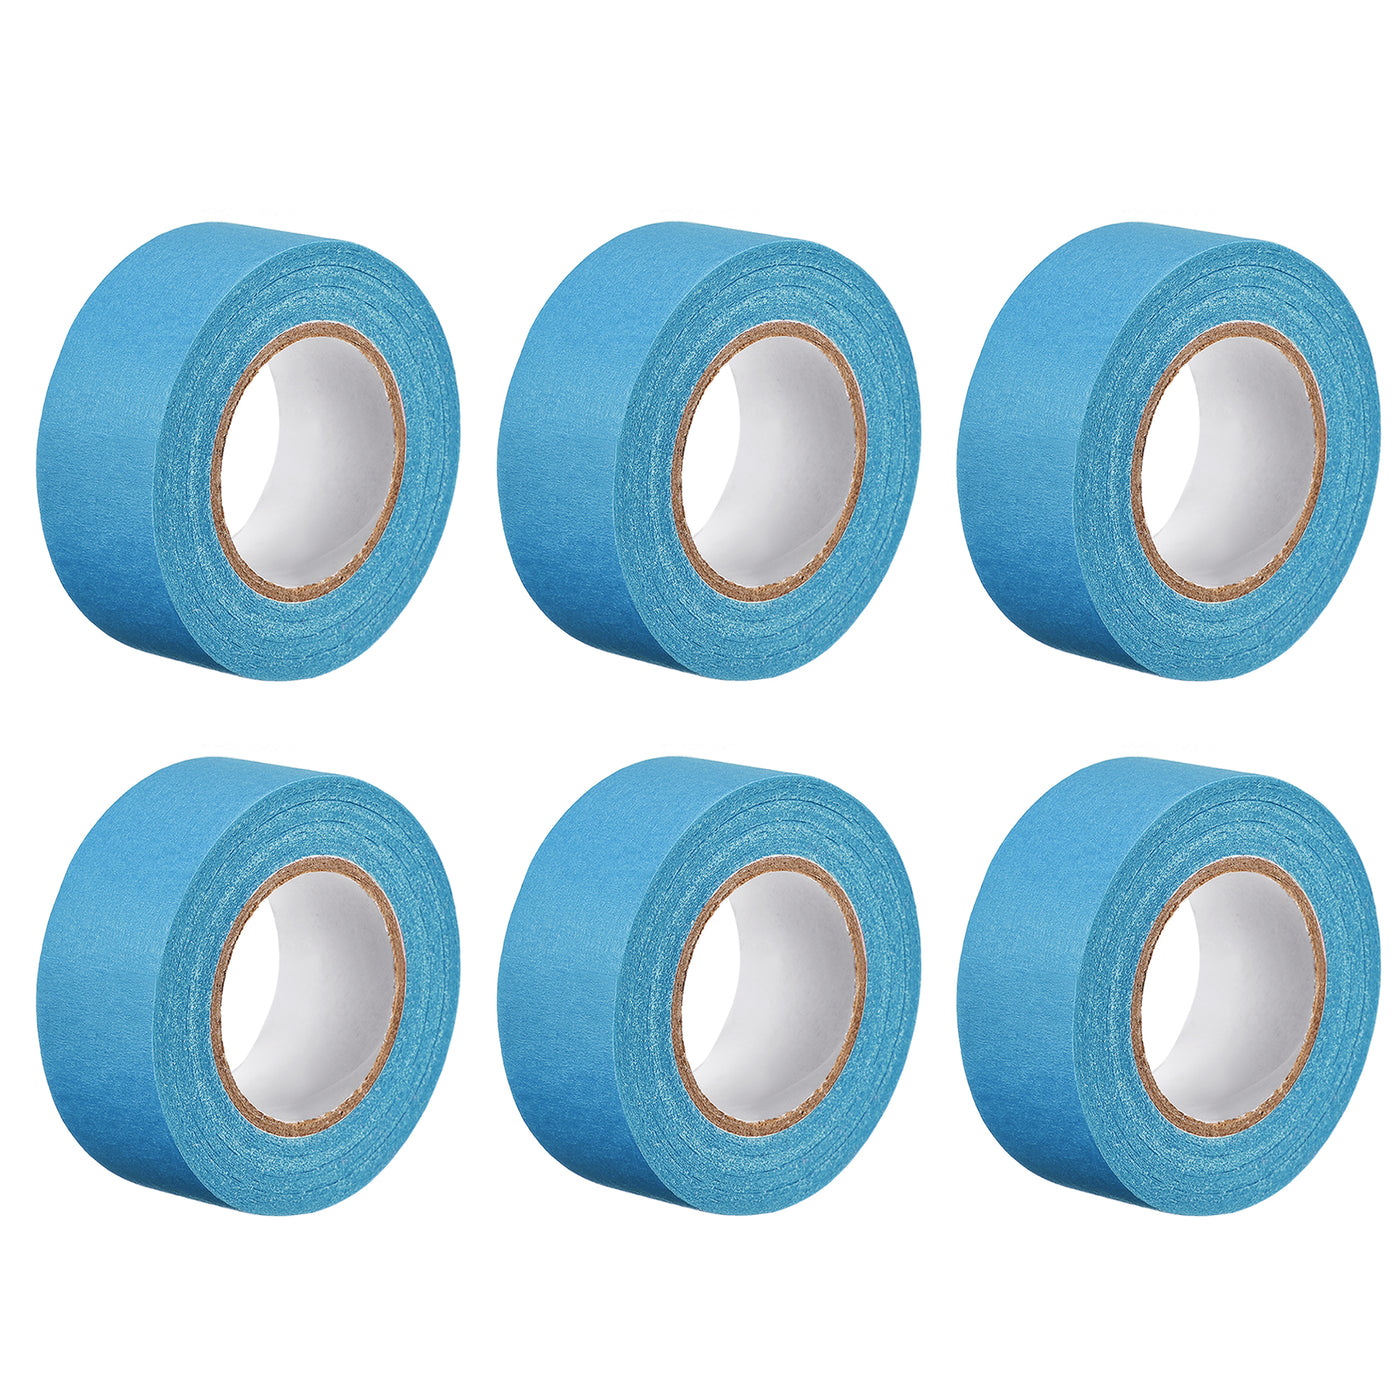 uxcell Uxcell 6Pcs 25mm 1 inch Wide 20m 21 Yards Masking Tape Painters Tape Rolls Light blue